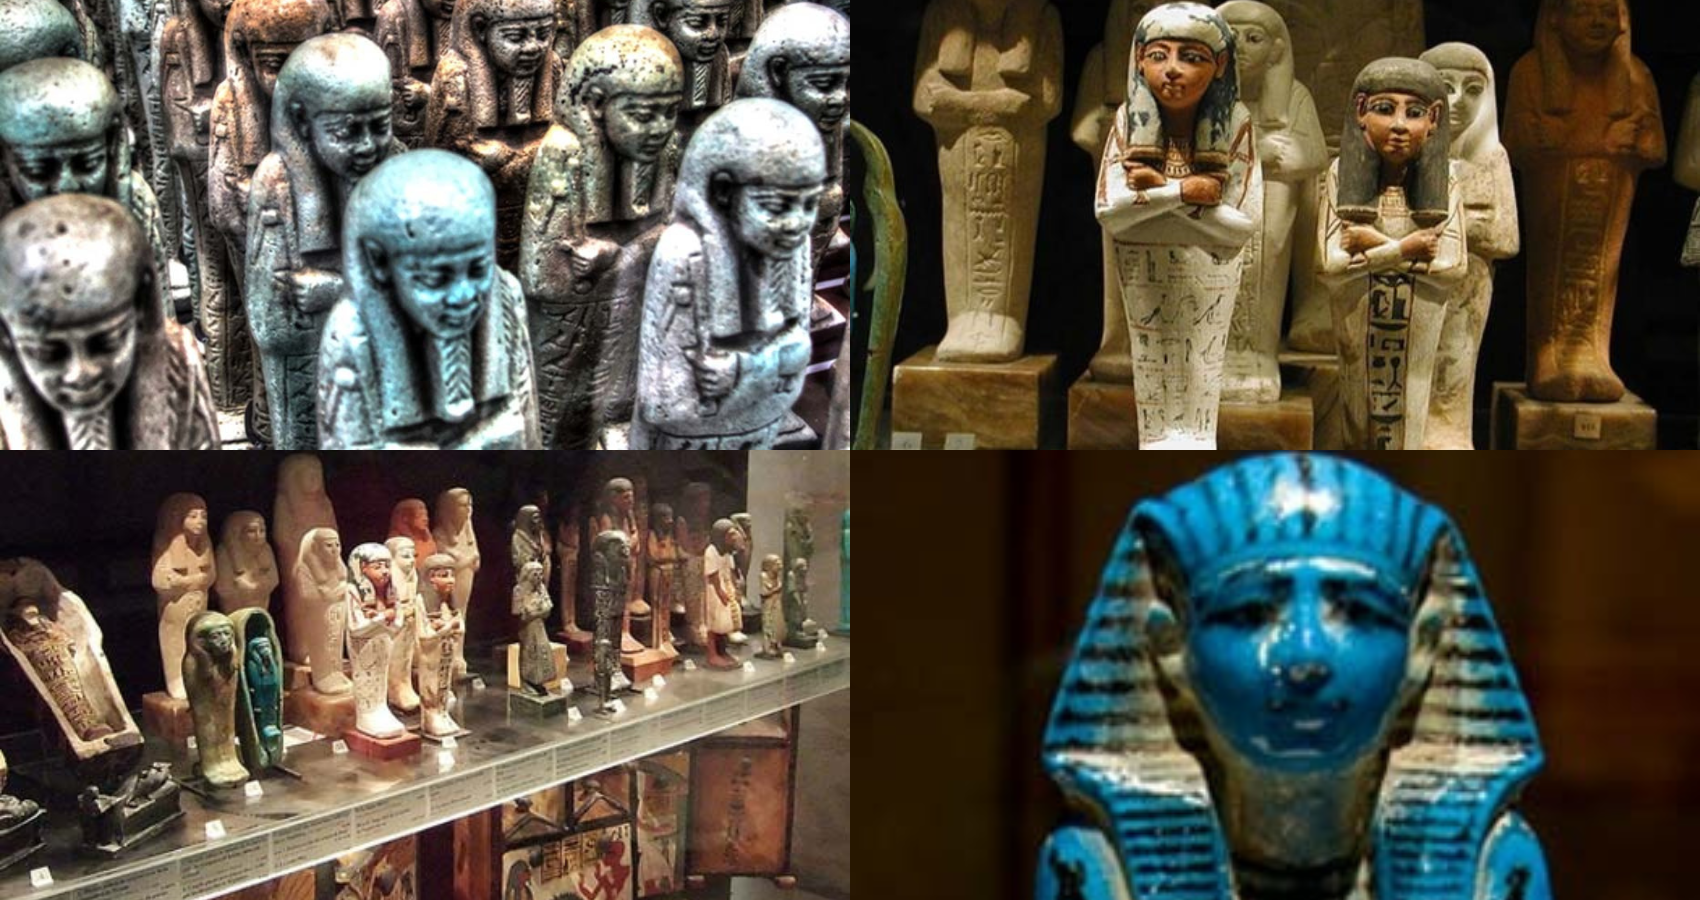 Pharaoh’s Little Helpers: The Shabti Funerary Statuettes of the Ancient Egyptians